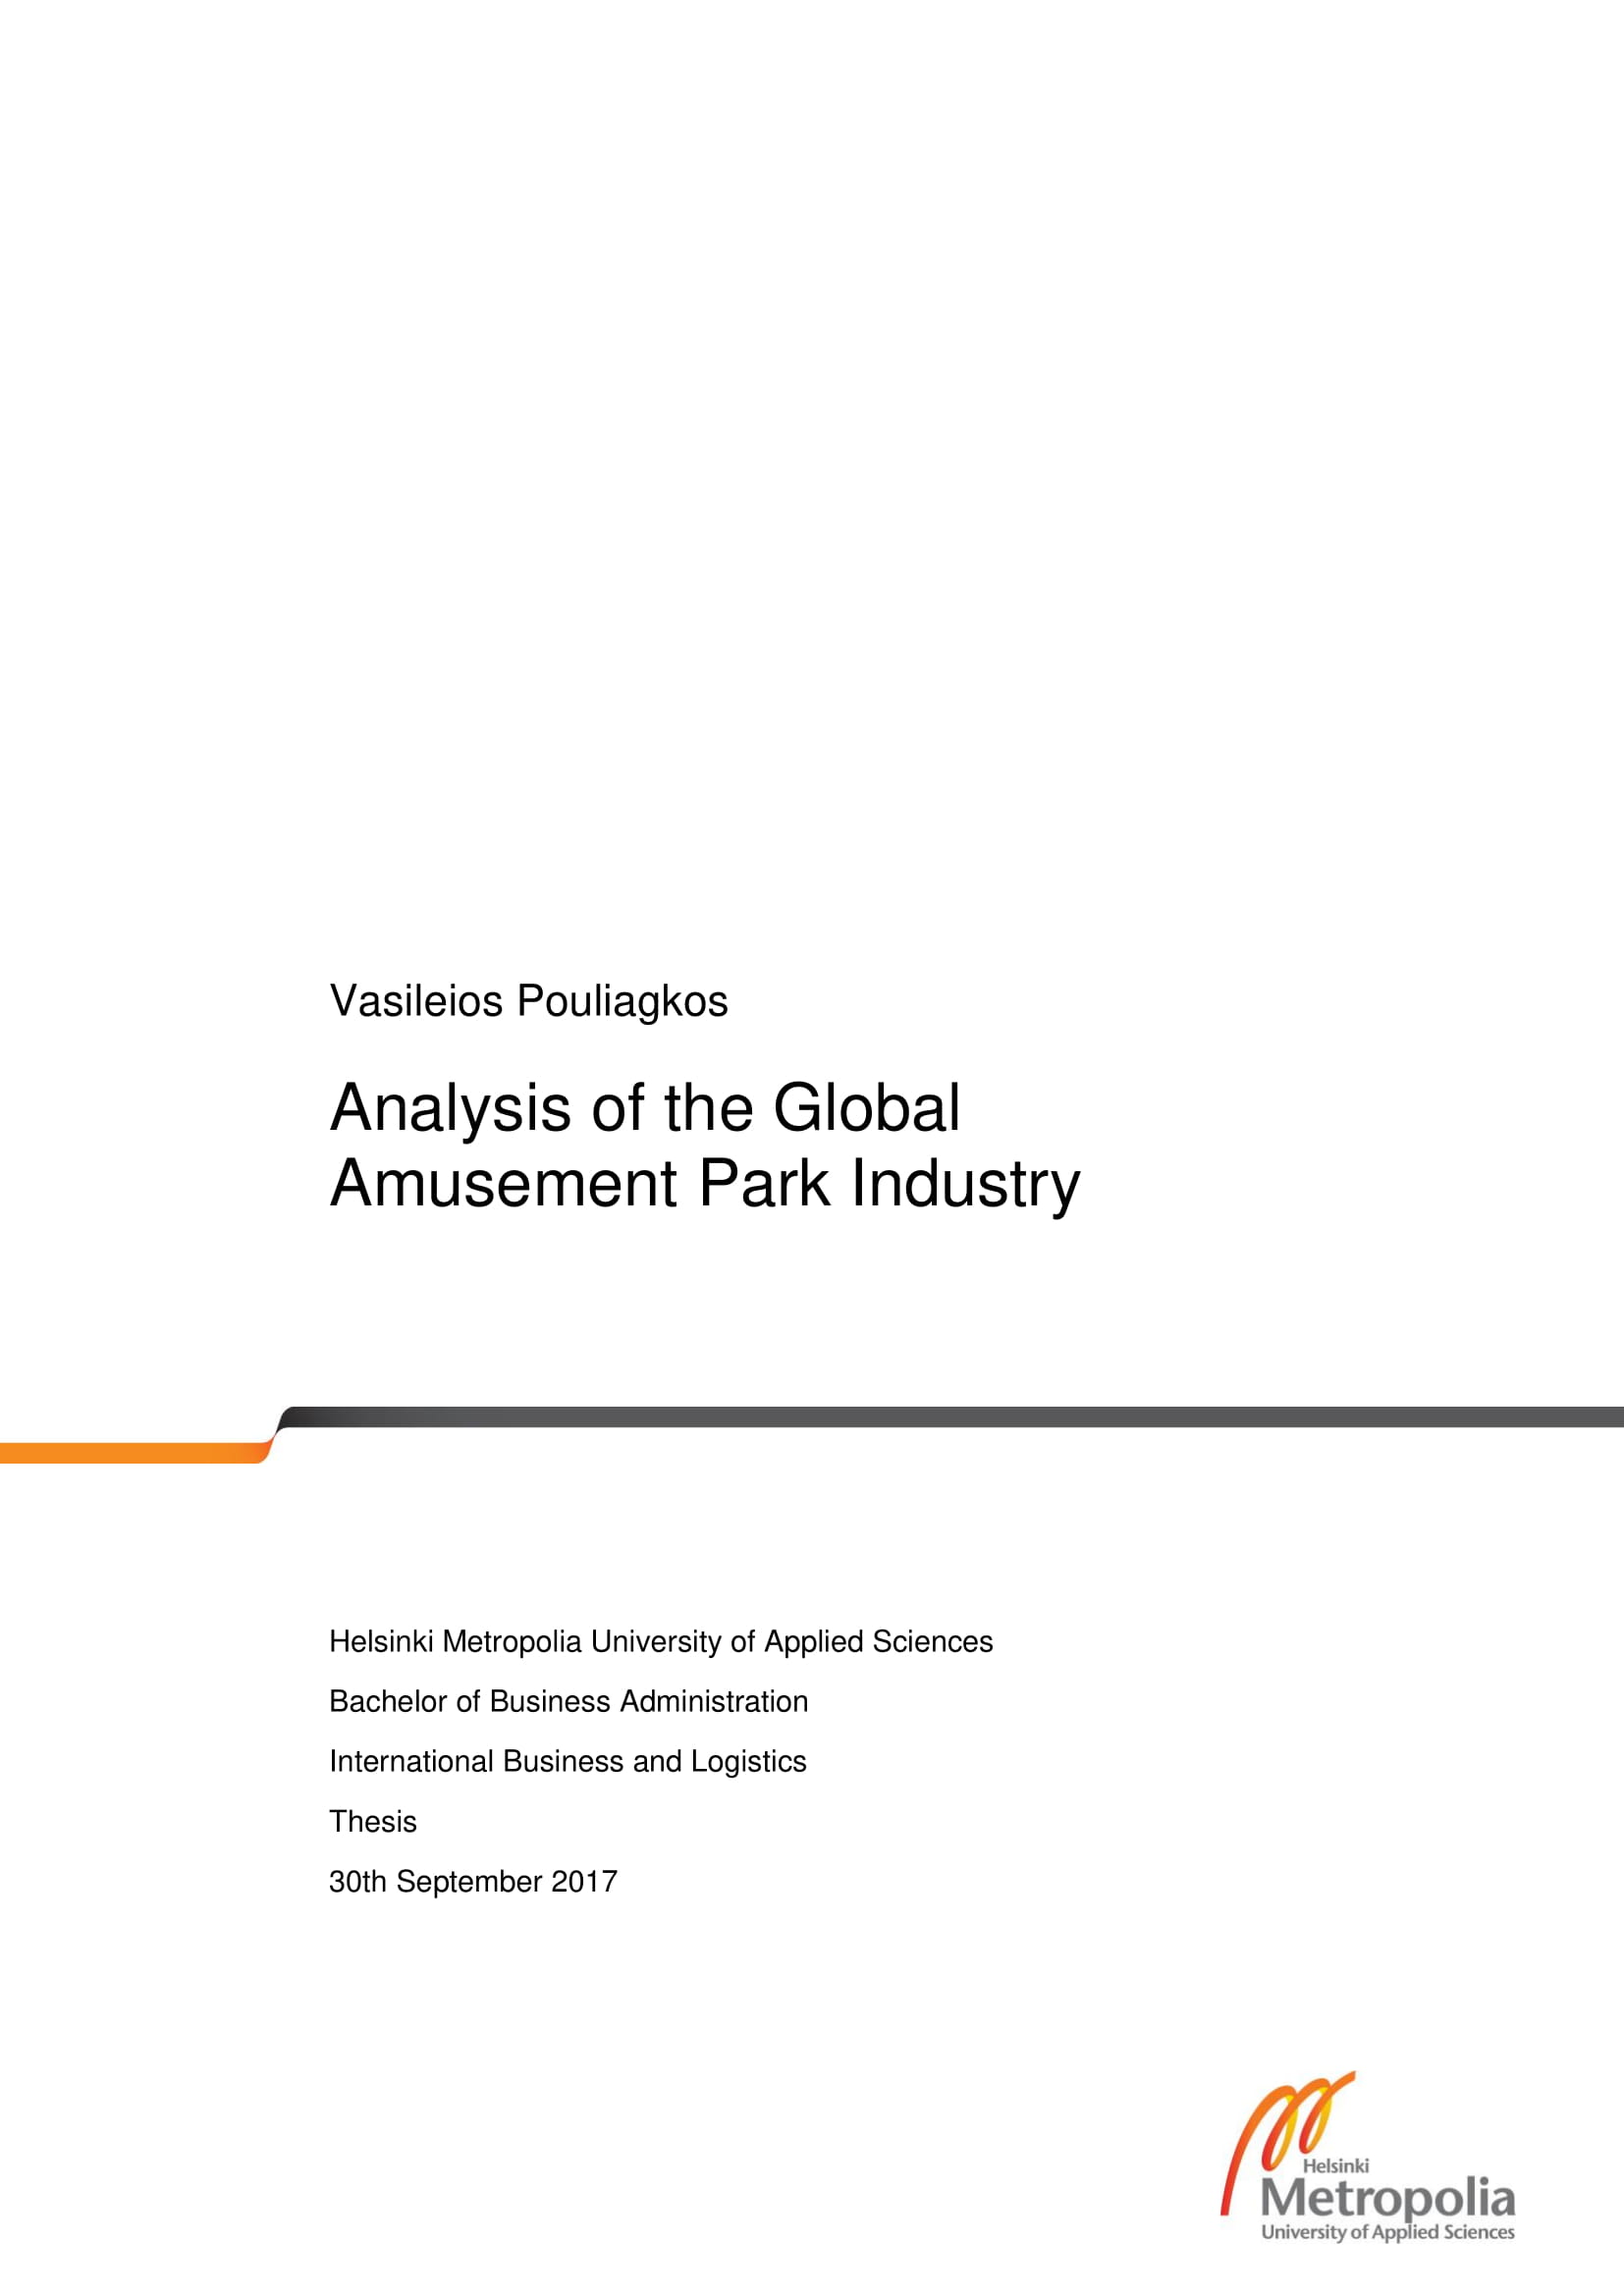 24+ Industry Analysis Examples - PDF  Examples Throughout Industry Analysis Report Template